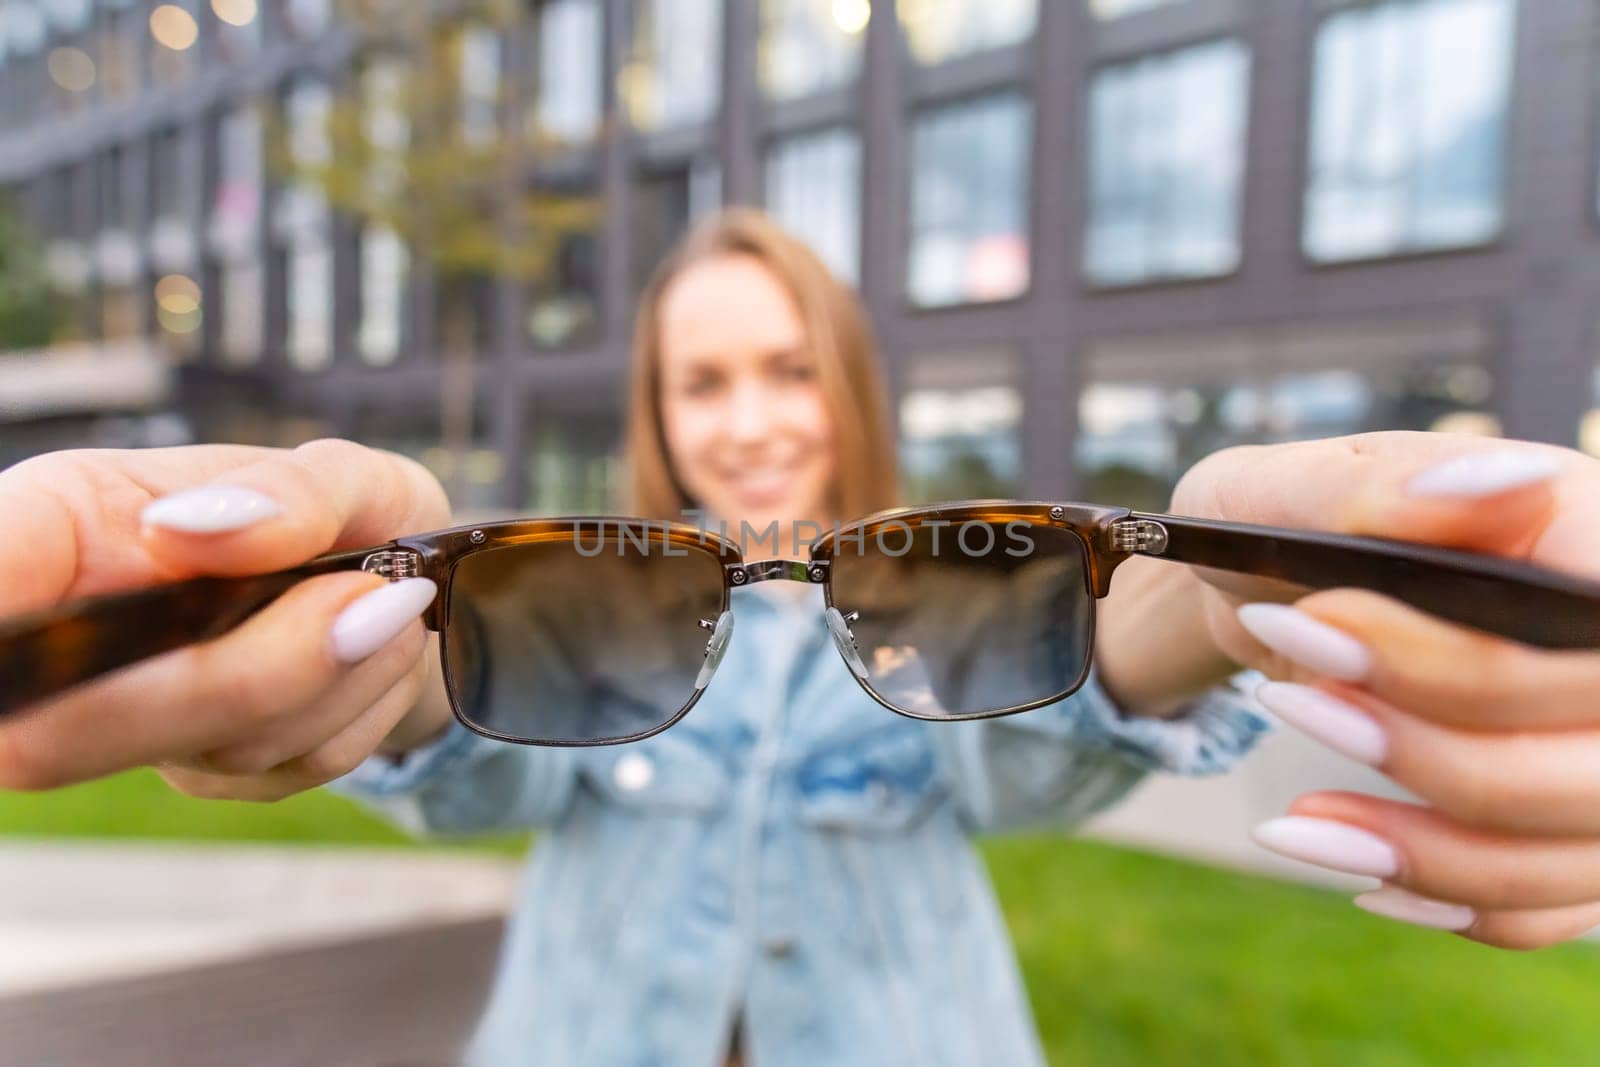 Attractive young blonde woman with long hair proposed to wear smart sunglasses.